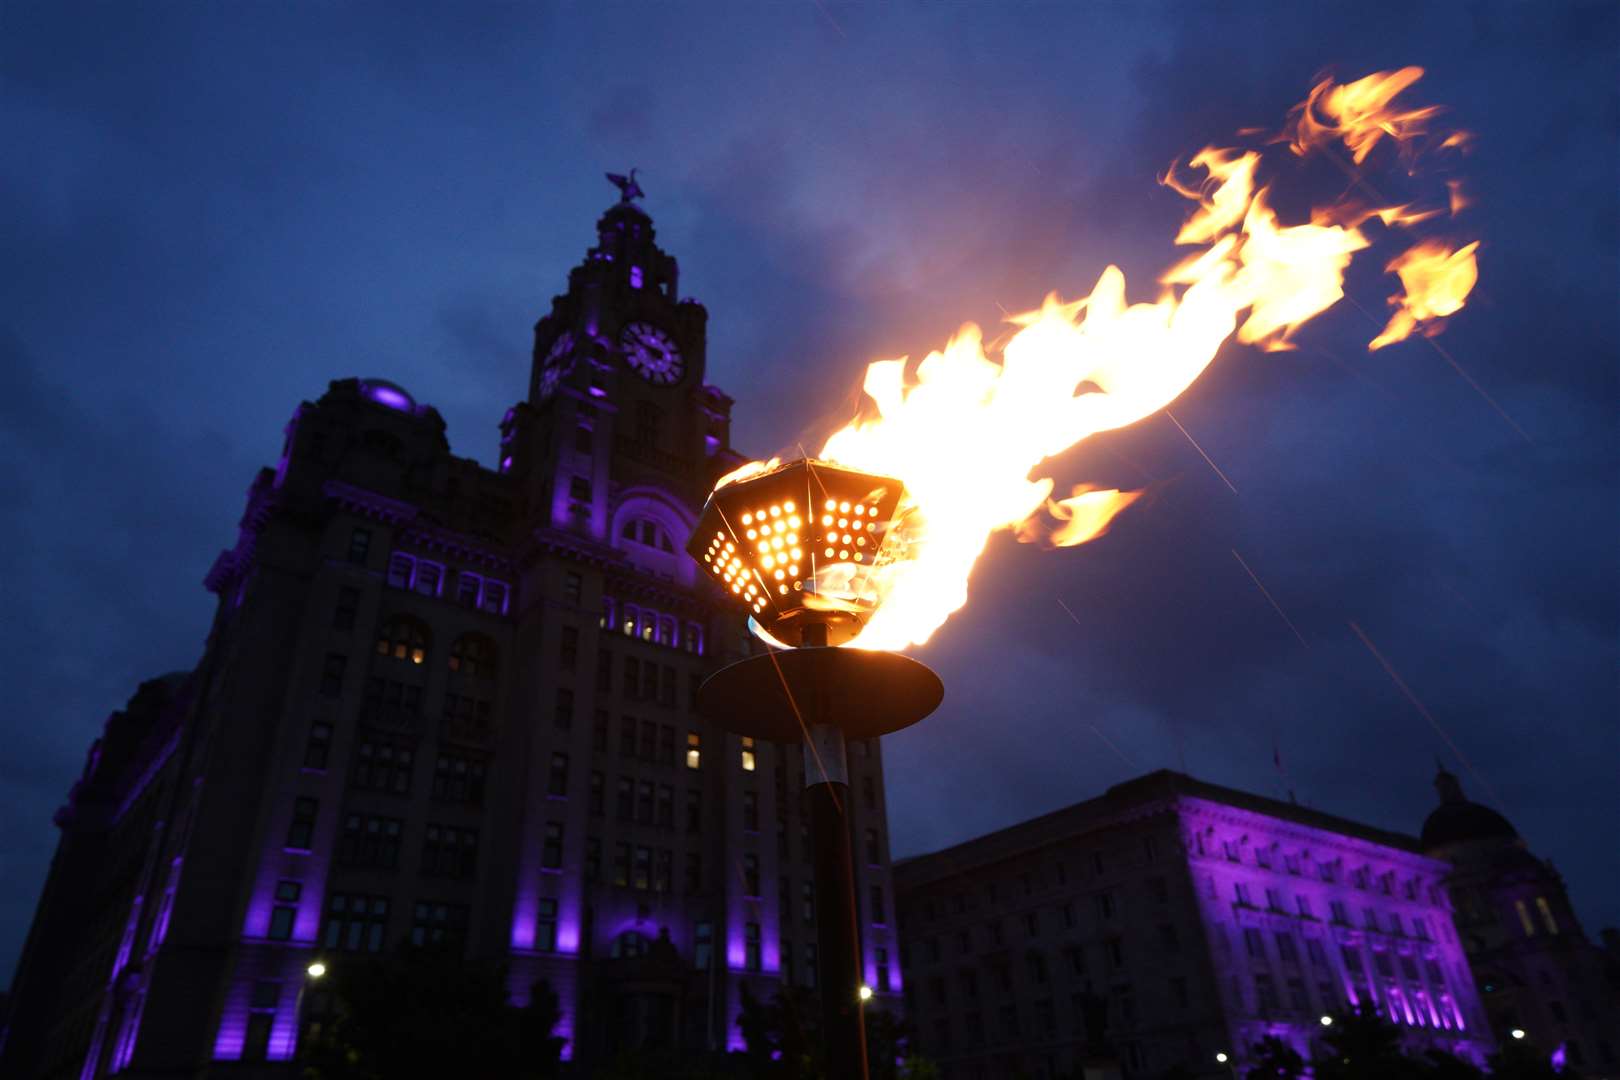 Beacons are lit outside the Royal Liver Building in Liverpool (Peter Byrne/PA)